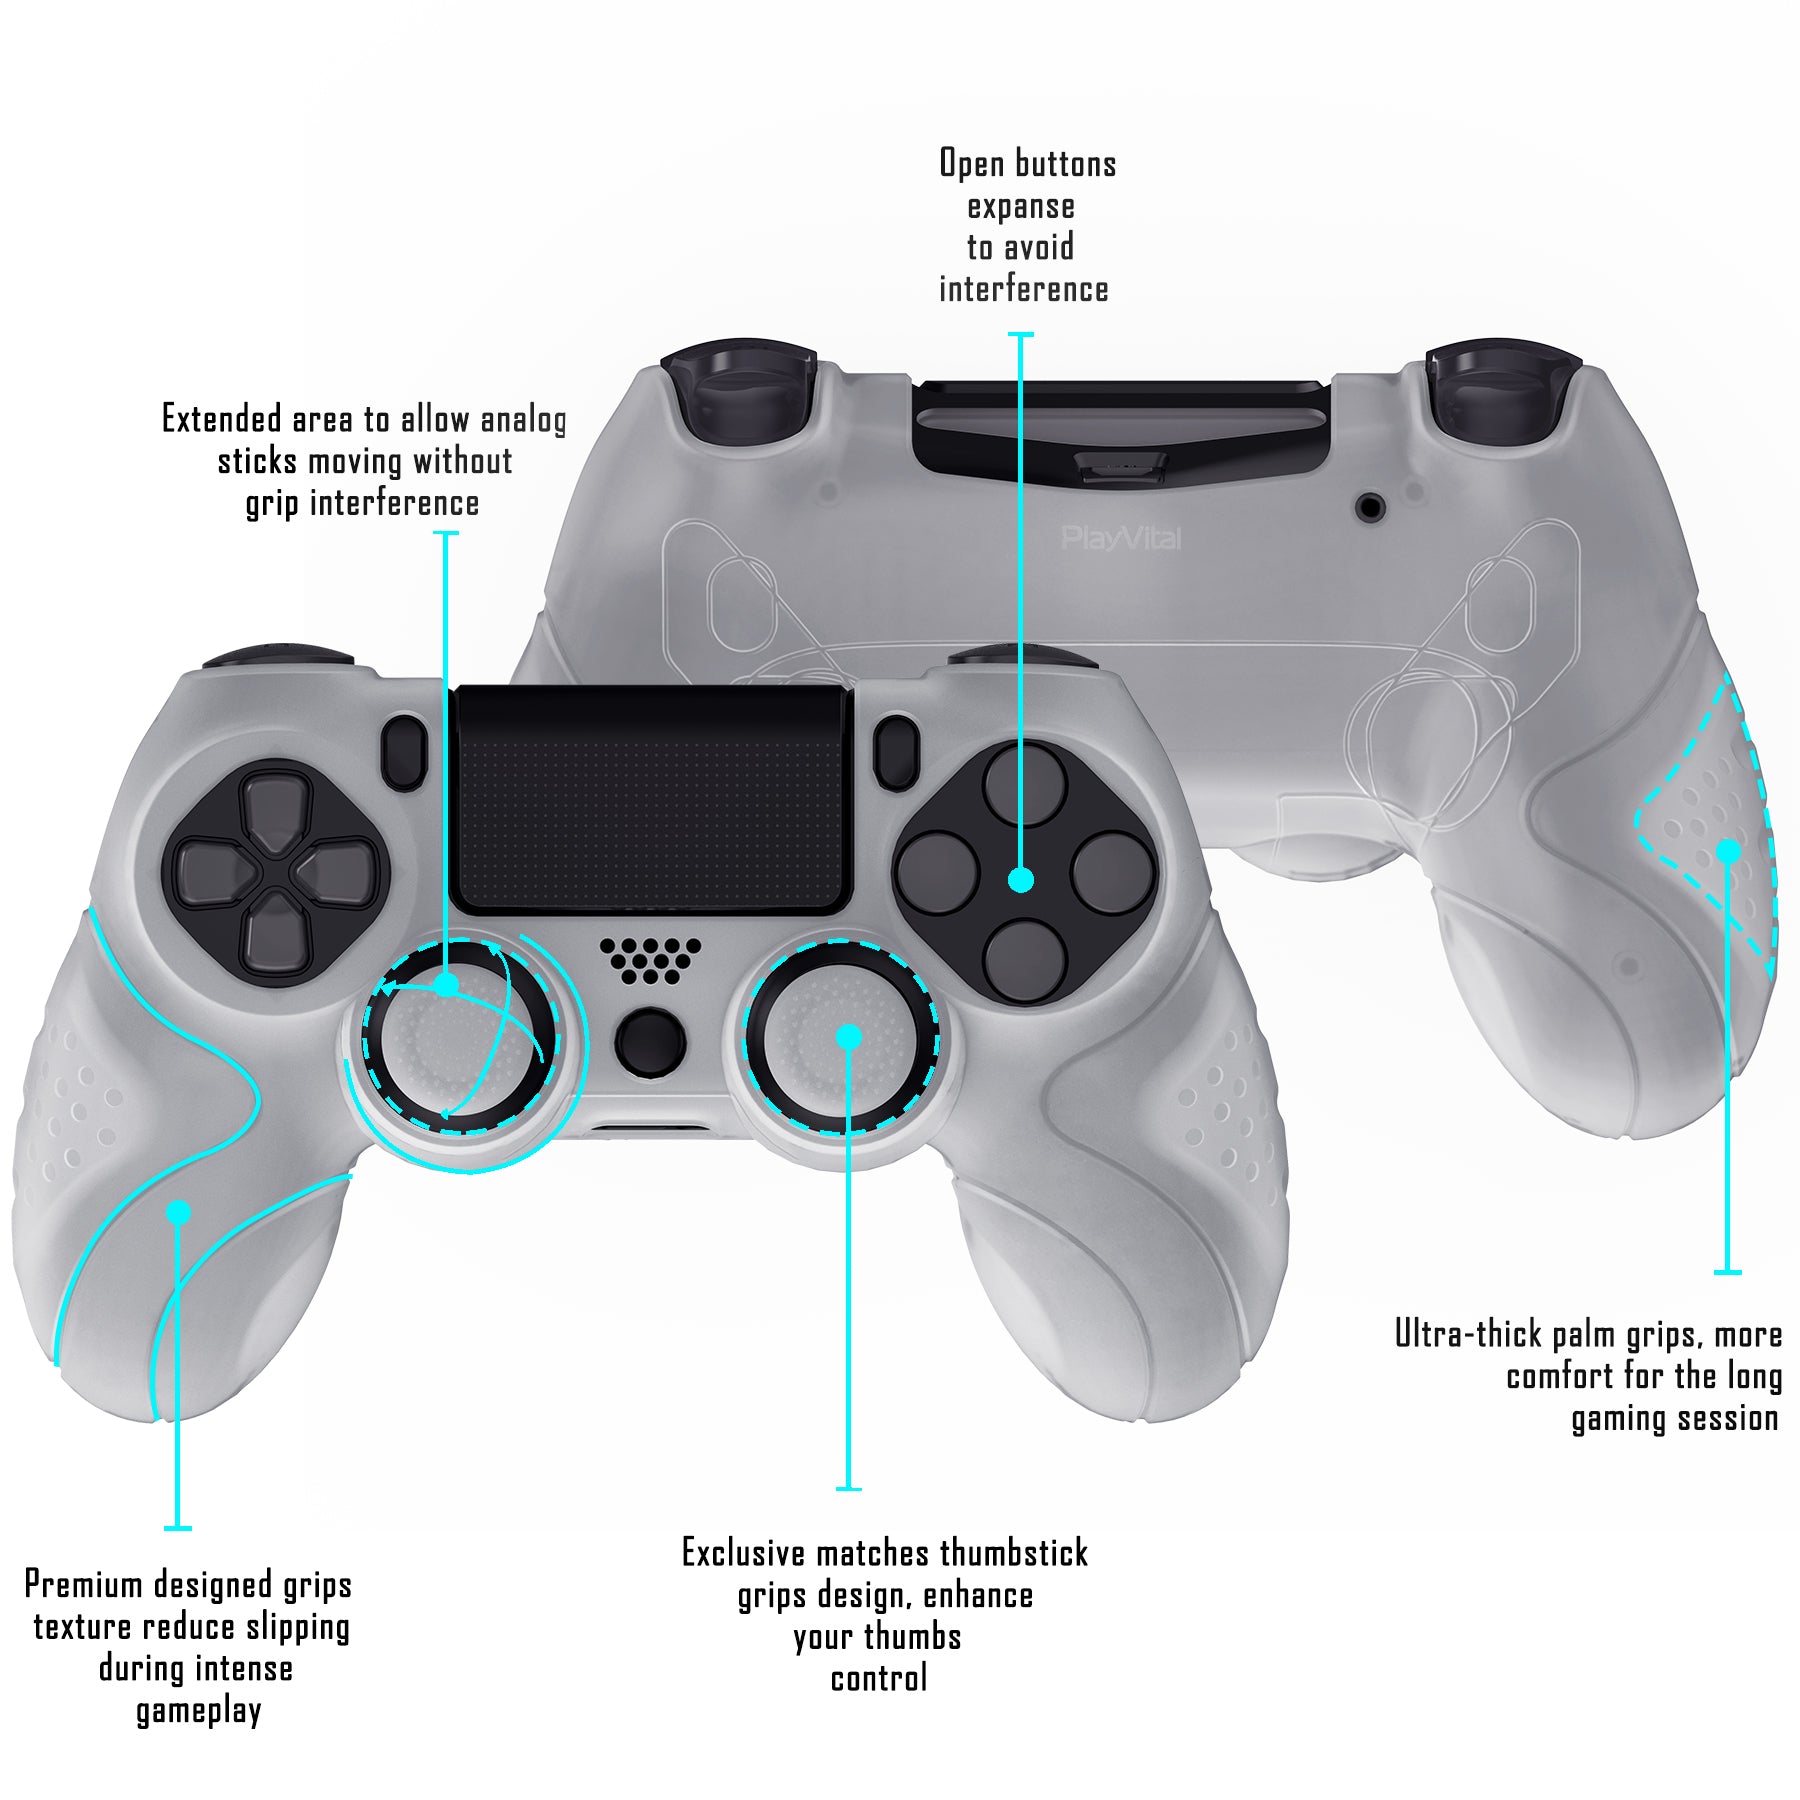  Skin for PS4 Controller, BRHE Anti-Slip Grip Silicone